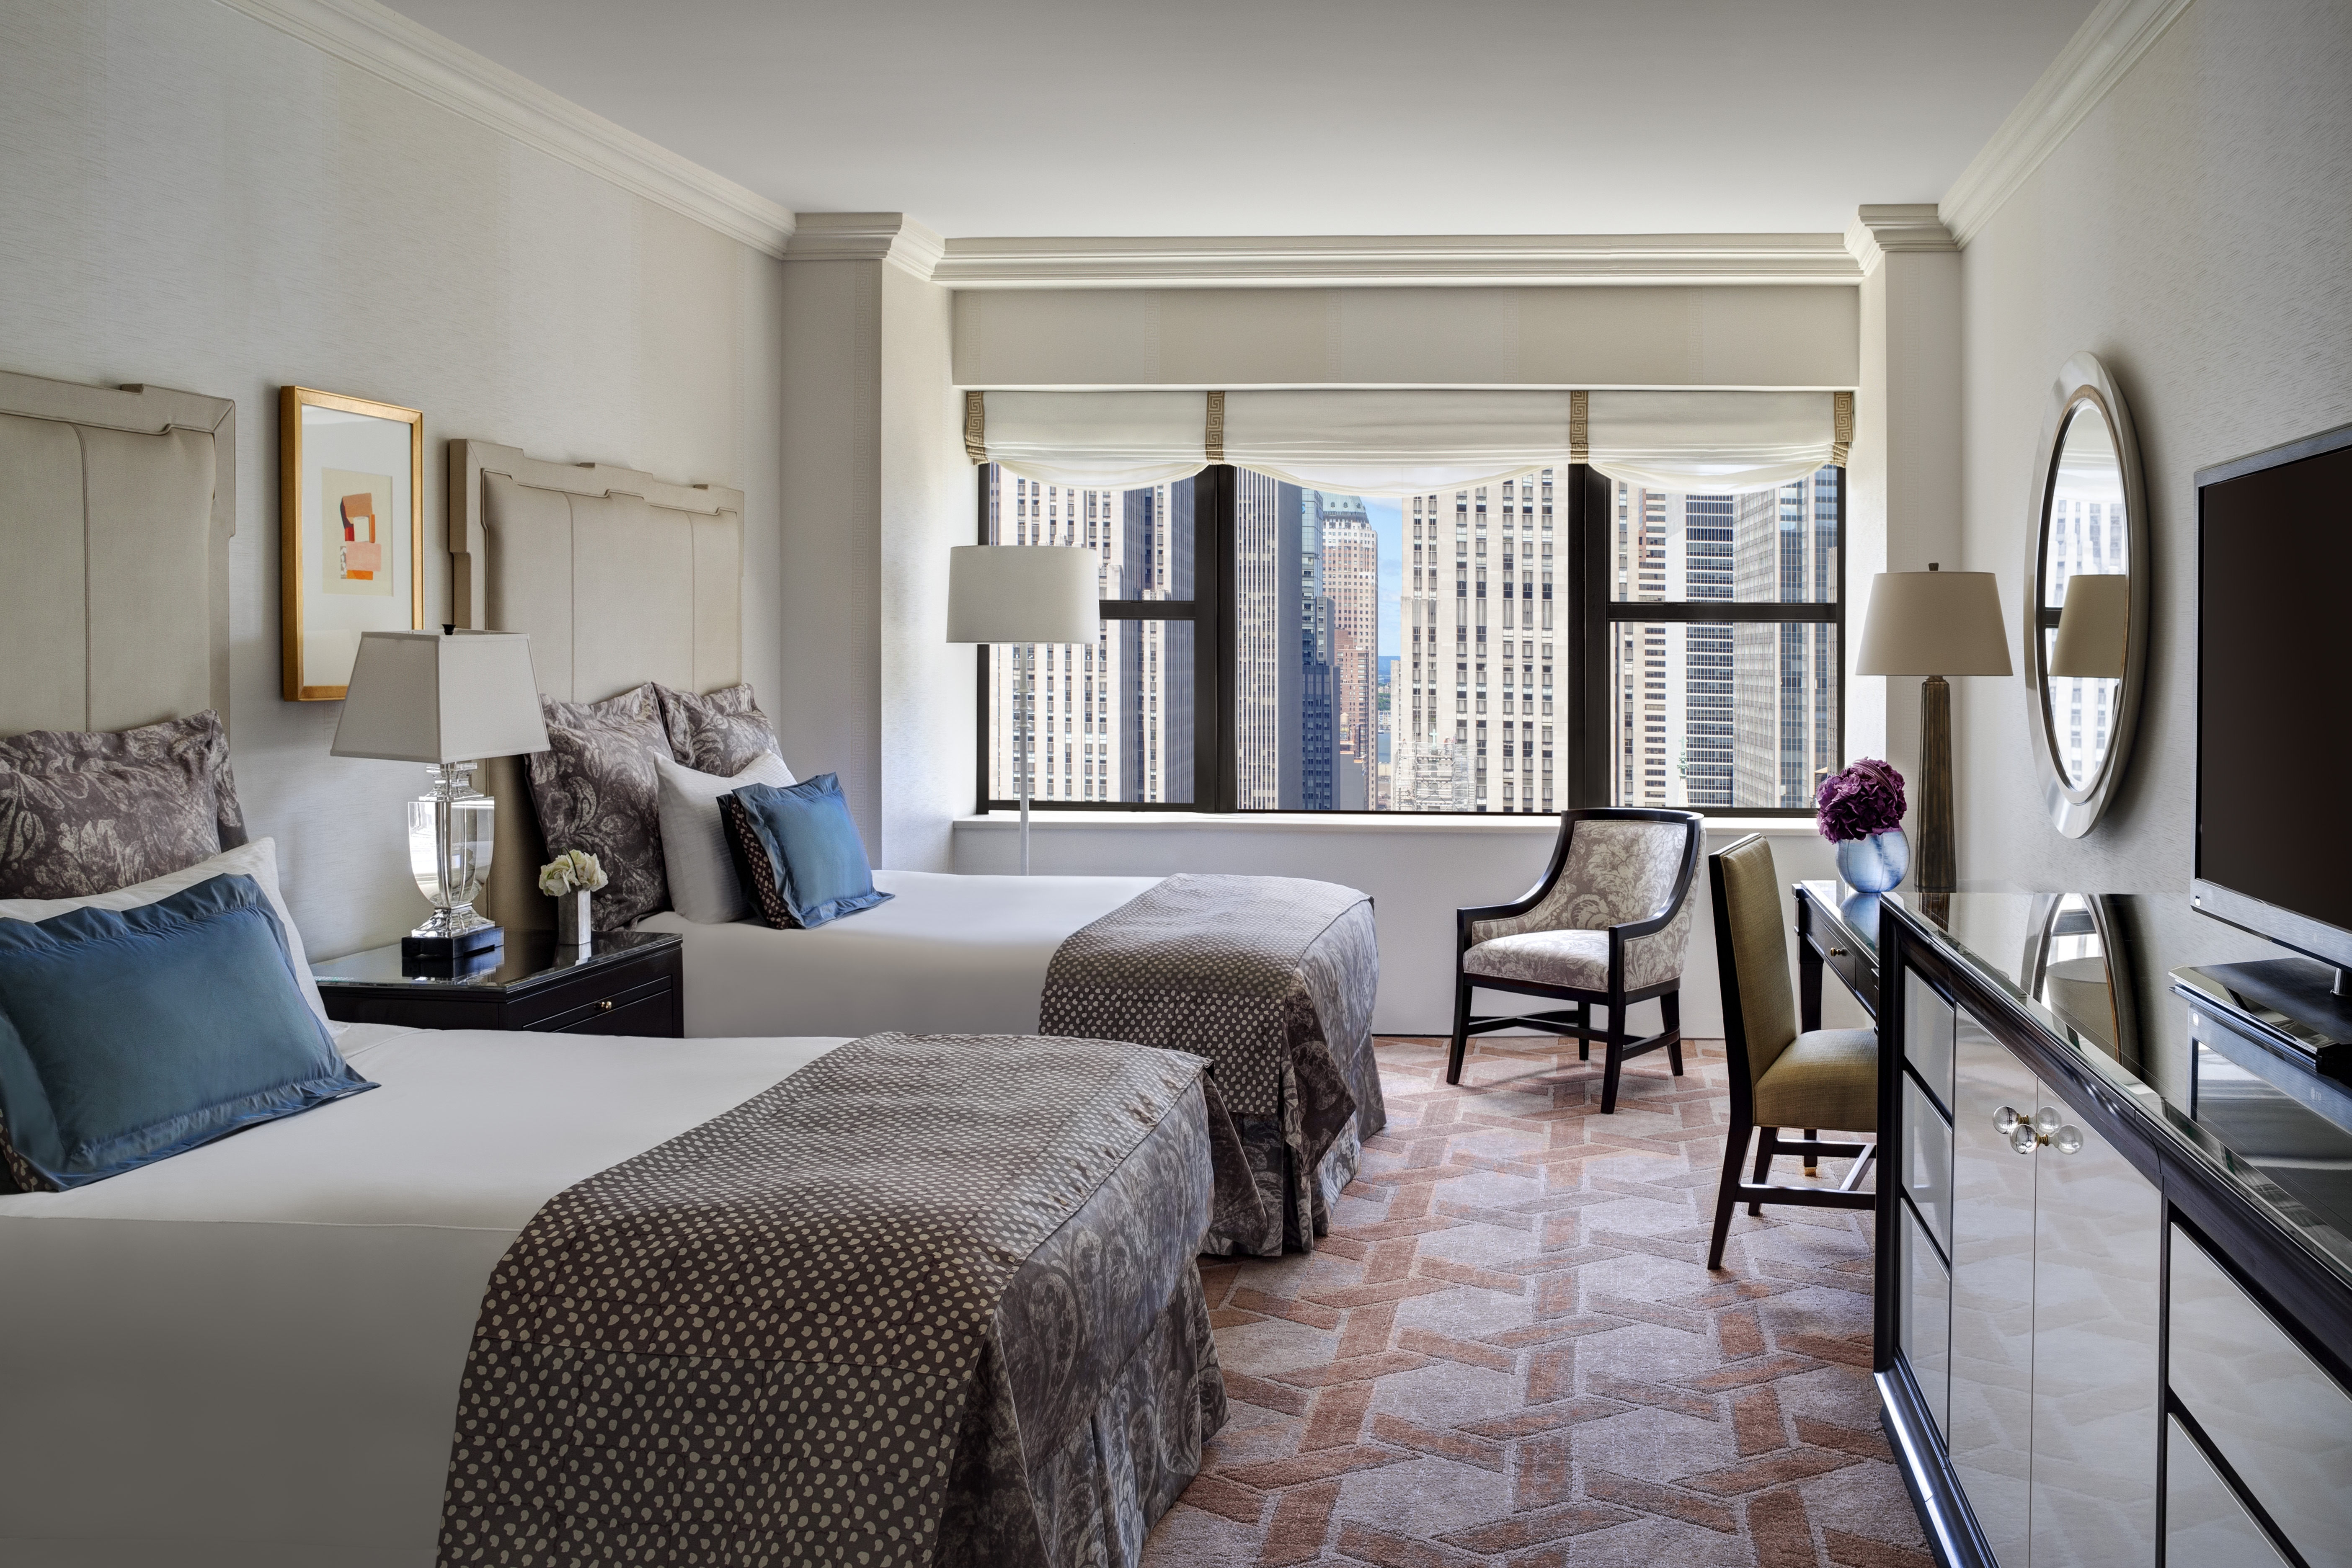 Plan a Winter Itinerary and Experience New York City at its Best | Midtown Manhattan Hotels ...